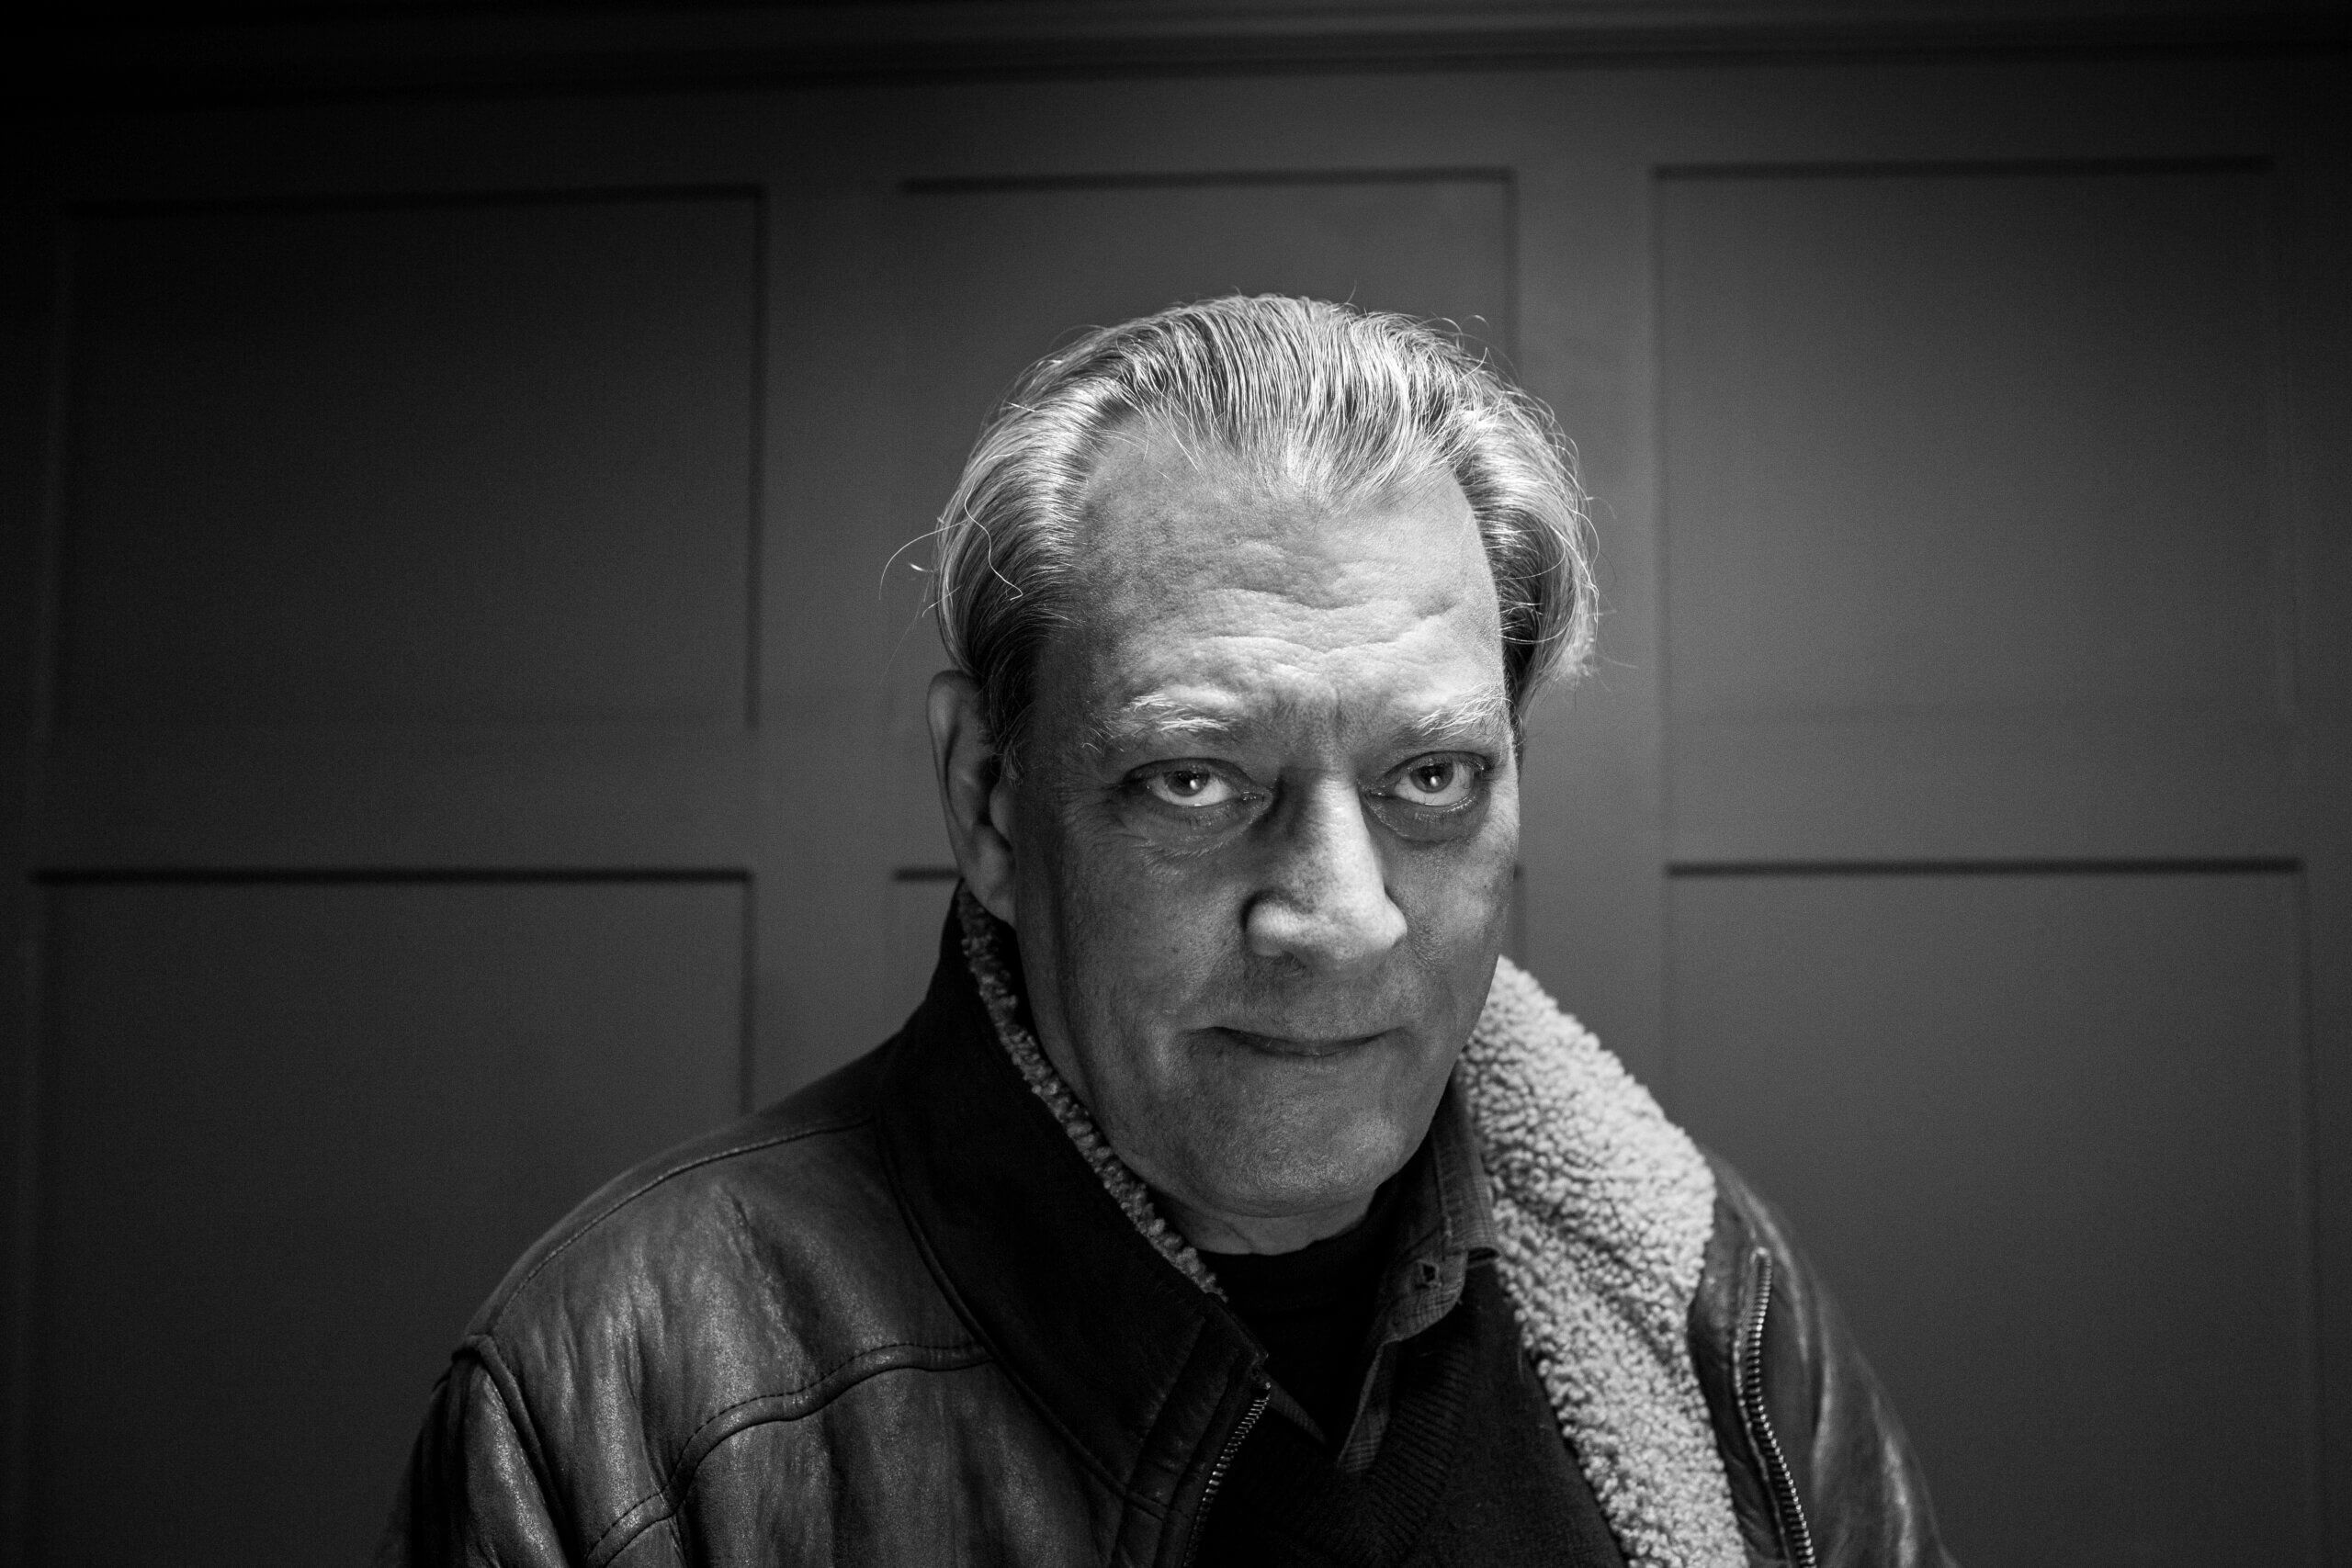 How Jewish literature and activism shaped the work of Paul Auster